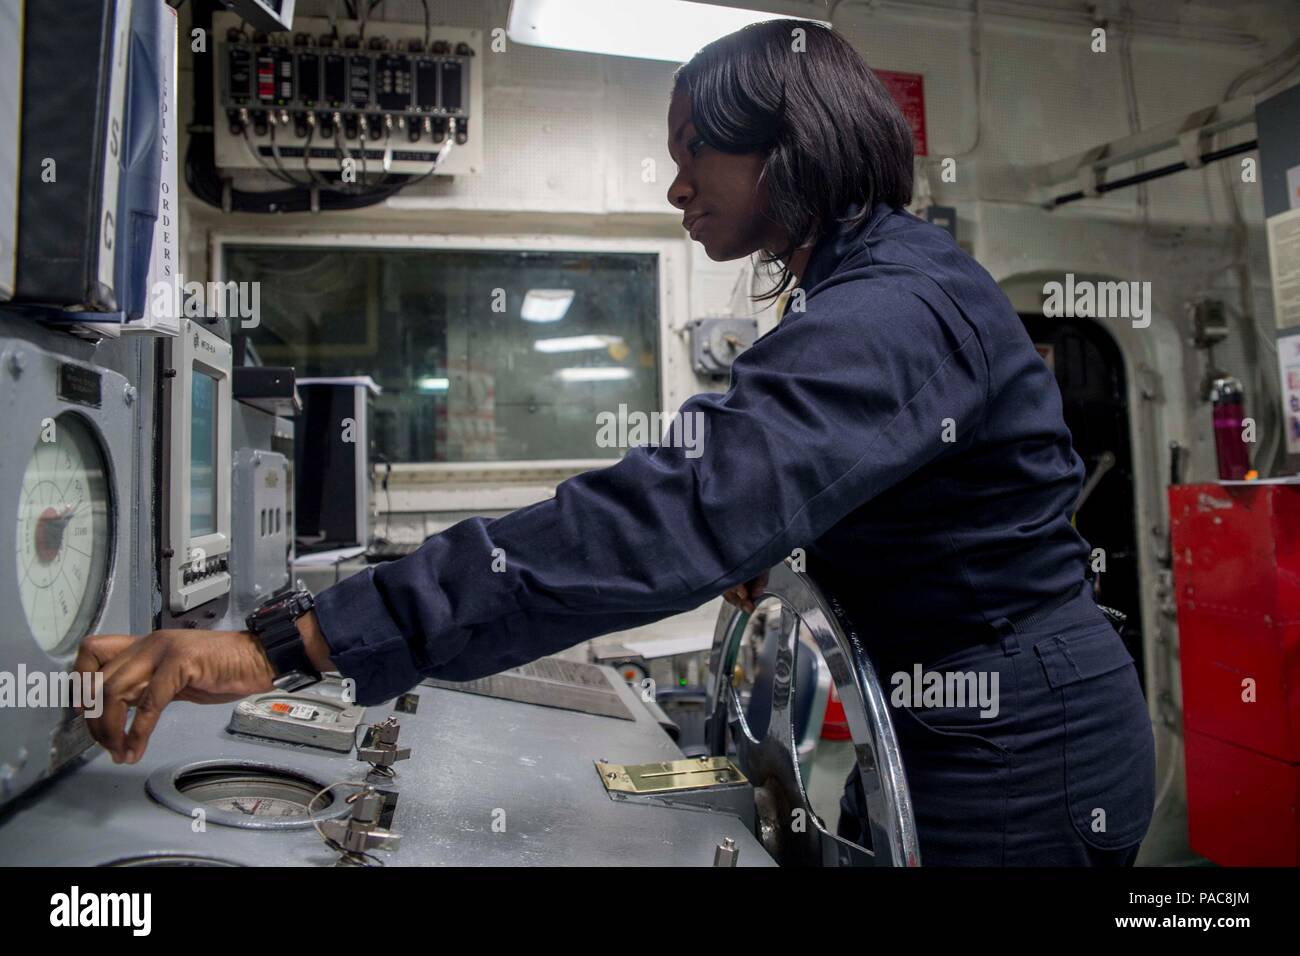 160308-N-YL073-130 ARABIAN GULF (March 8, 2016) Electrician's Mate 3rd Class Tiffany Wizzard, from Kingston, Jamaica, responds to the engine order telegraph in the aft main machinery room aboard the amphibious assault ship USS Kearsarge (LHD 3). Kearsarge is the flagship for the Kearsarge Amphibious Ready Group (ARG) and, with the embarked 26th Marine Expeditionary Unit (MEU), is deployed in support of maritime security operations and theater security cooperation efforts in the U.S. 5th Fleet area of operations. (U.S. Navy photo by Mass Communication Specialist 2nd Class Shamira Purifoy/Releas Stock Photo